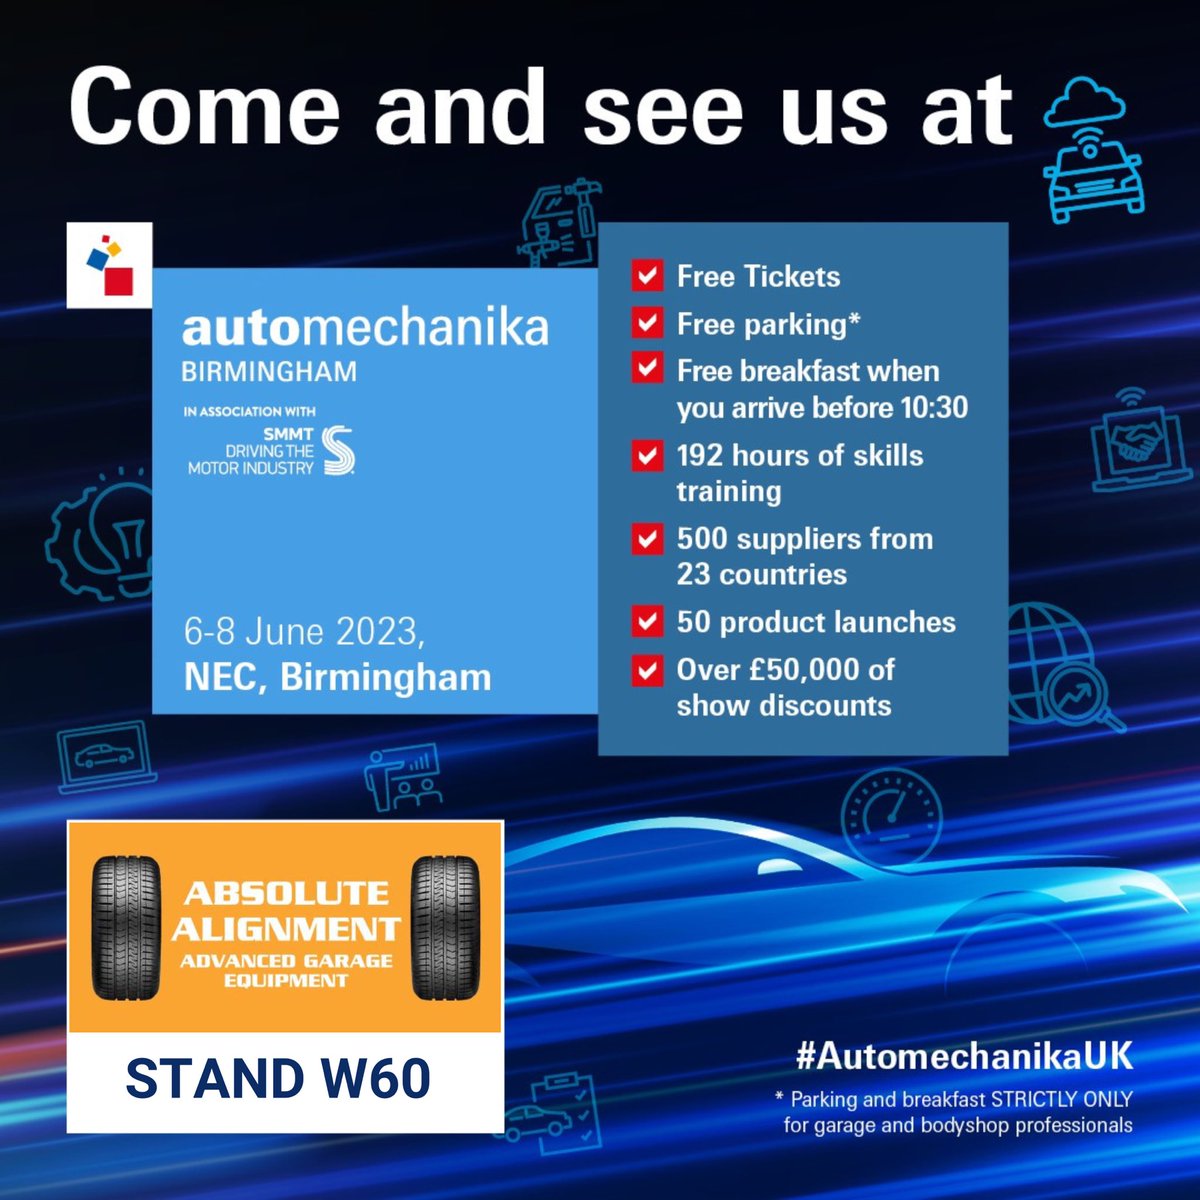 Not too long now, we’re gearing up for @automechanikaUK on 6-8 June at the NEC in Birmingham! Register for your free ticket! 

#automechanikauk #automotive #automotivemechanic #automotiveaftermarket #automotiverepair #automotiveindustry #garageequipment #wheelalignment